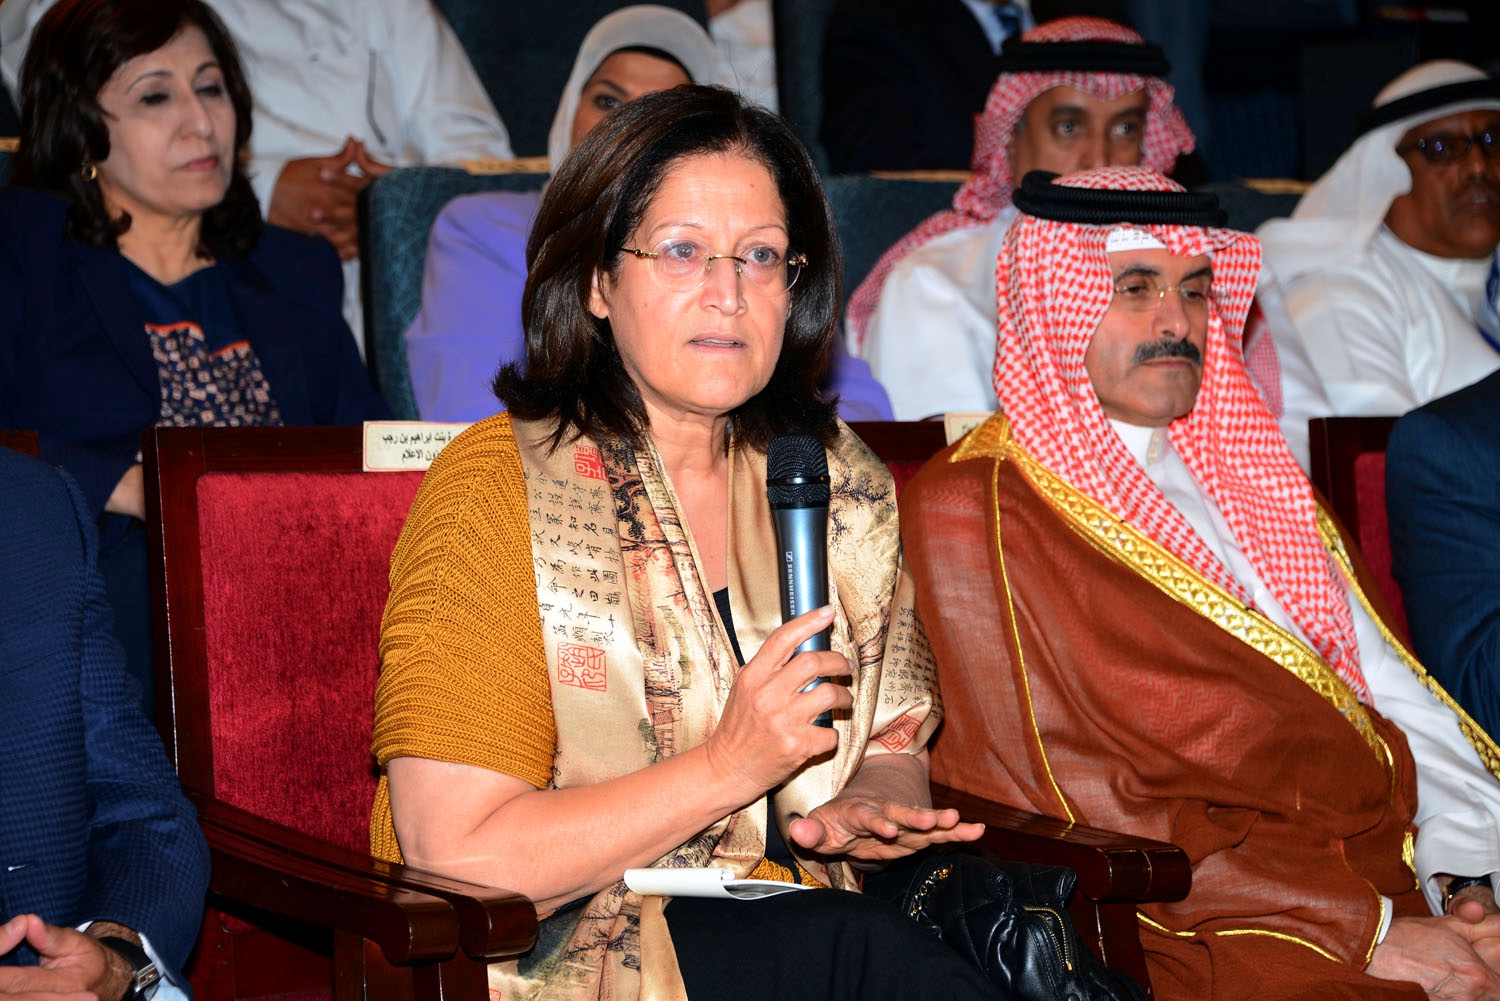 Bahrain's State Minister for Information Affairs Samira Rajab during the discussion panel